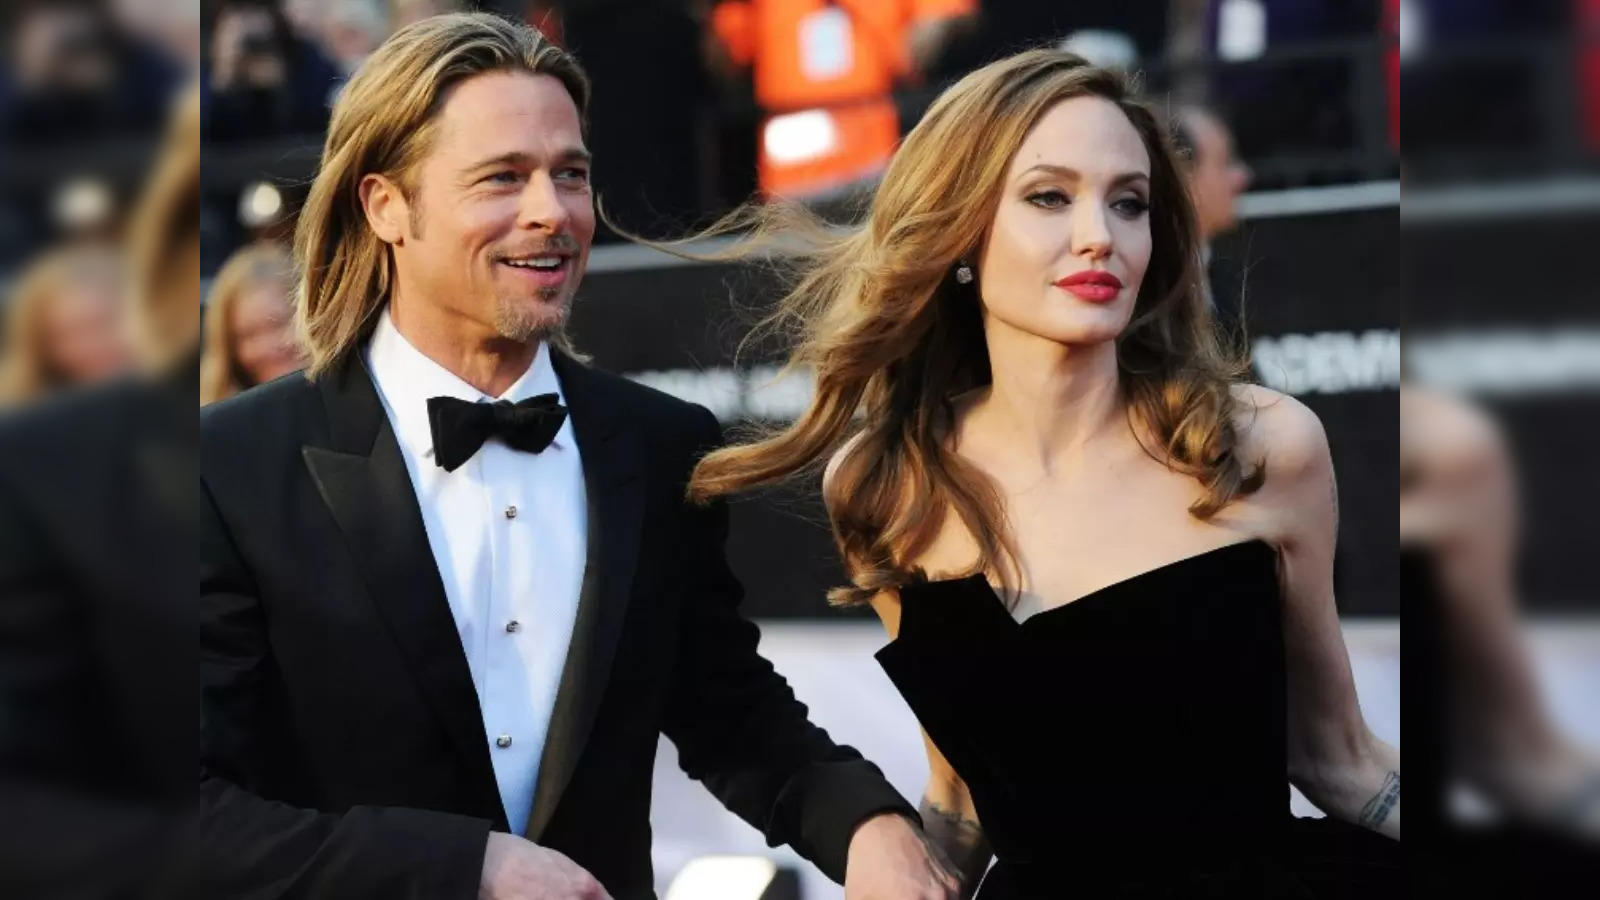 Who is Brad Pitt dating? Past girlfriends and ex-wives revealed